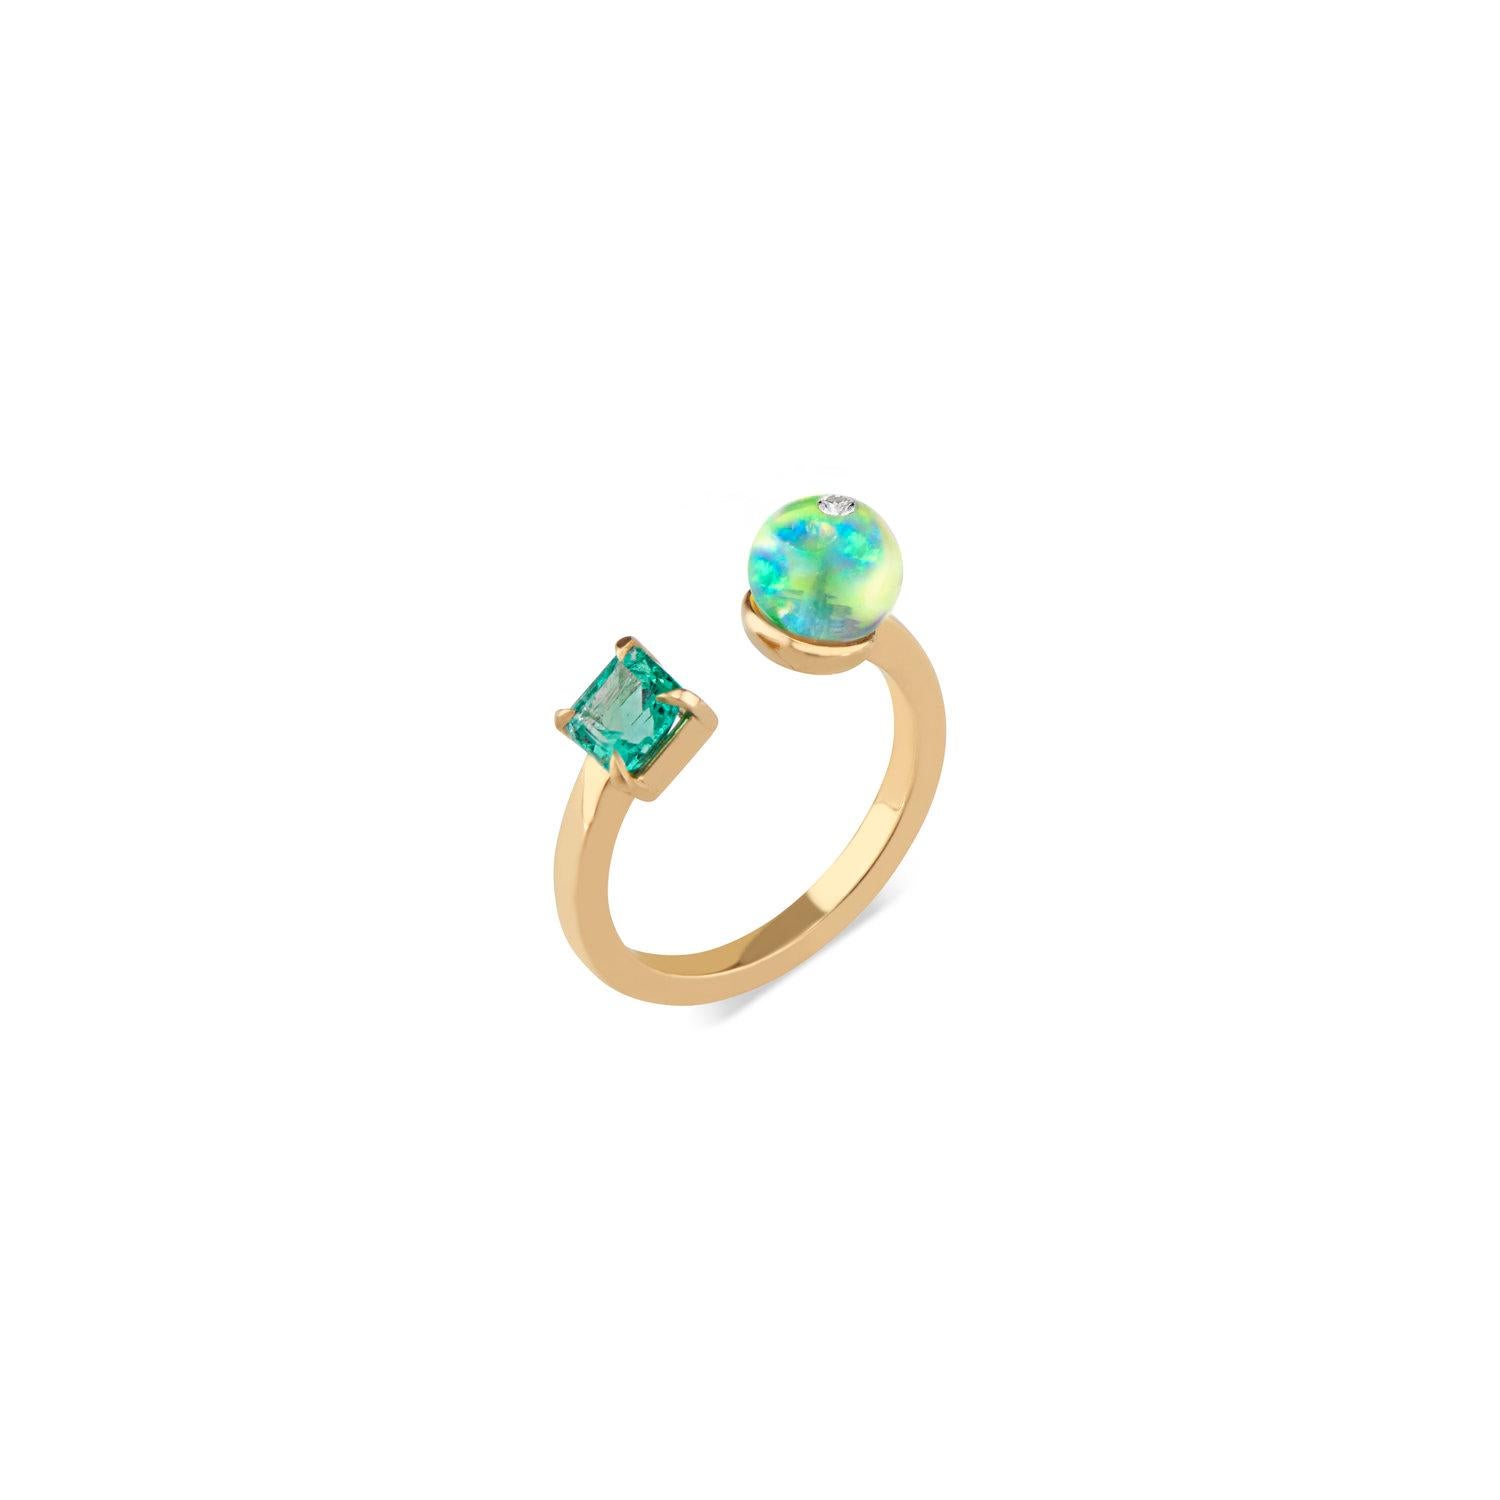 Abstract and artful, Ri Noor's Toi Moi Opal Bead Emerald and Diamond Ring creates a dynamic contrast between geometric shapes. The squared band of 18k yellow gold wraps around the wearer's finger, presenting a vivid green emerald on one side and, on